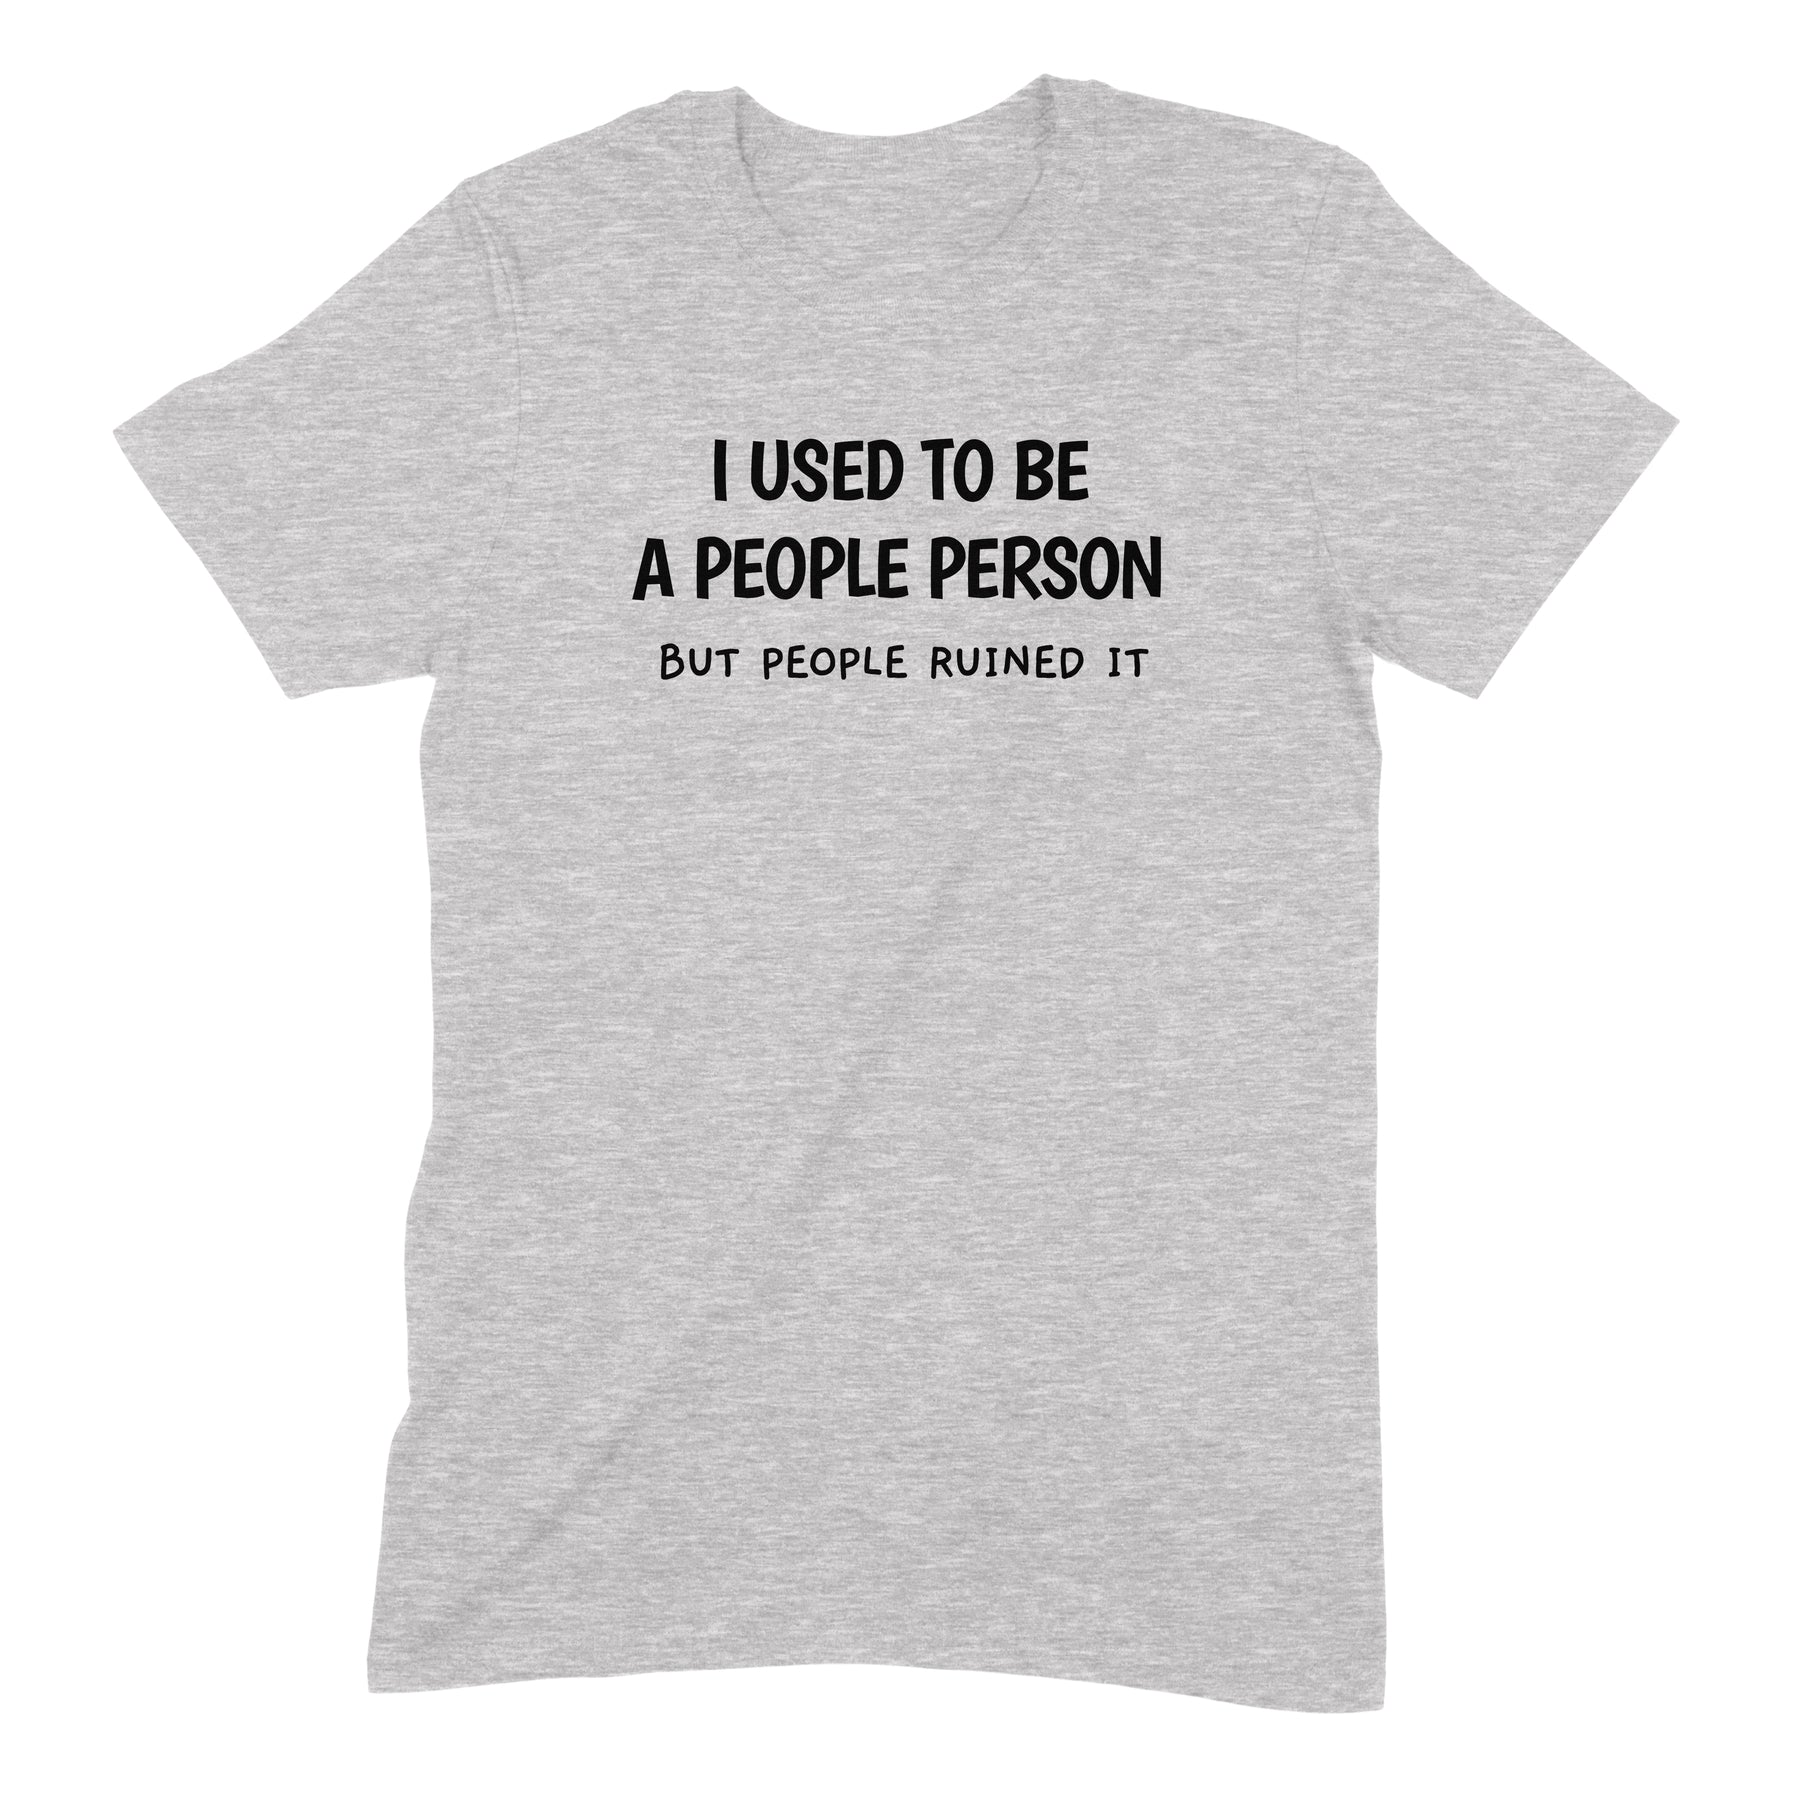 "People Person" Premium Midweight Ringspun Cotton T-Shirt - Mens/Womens Fits